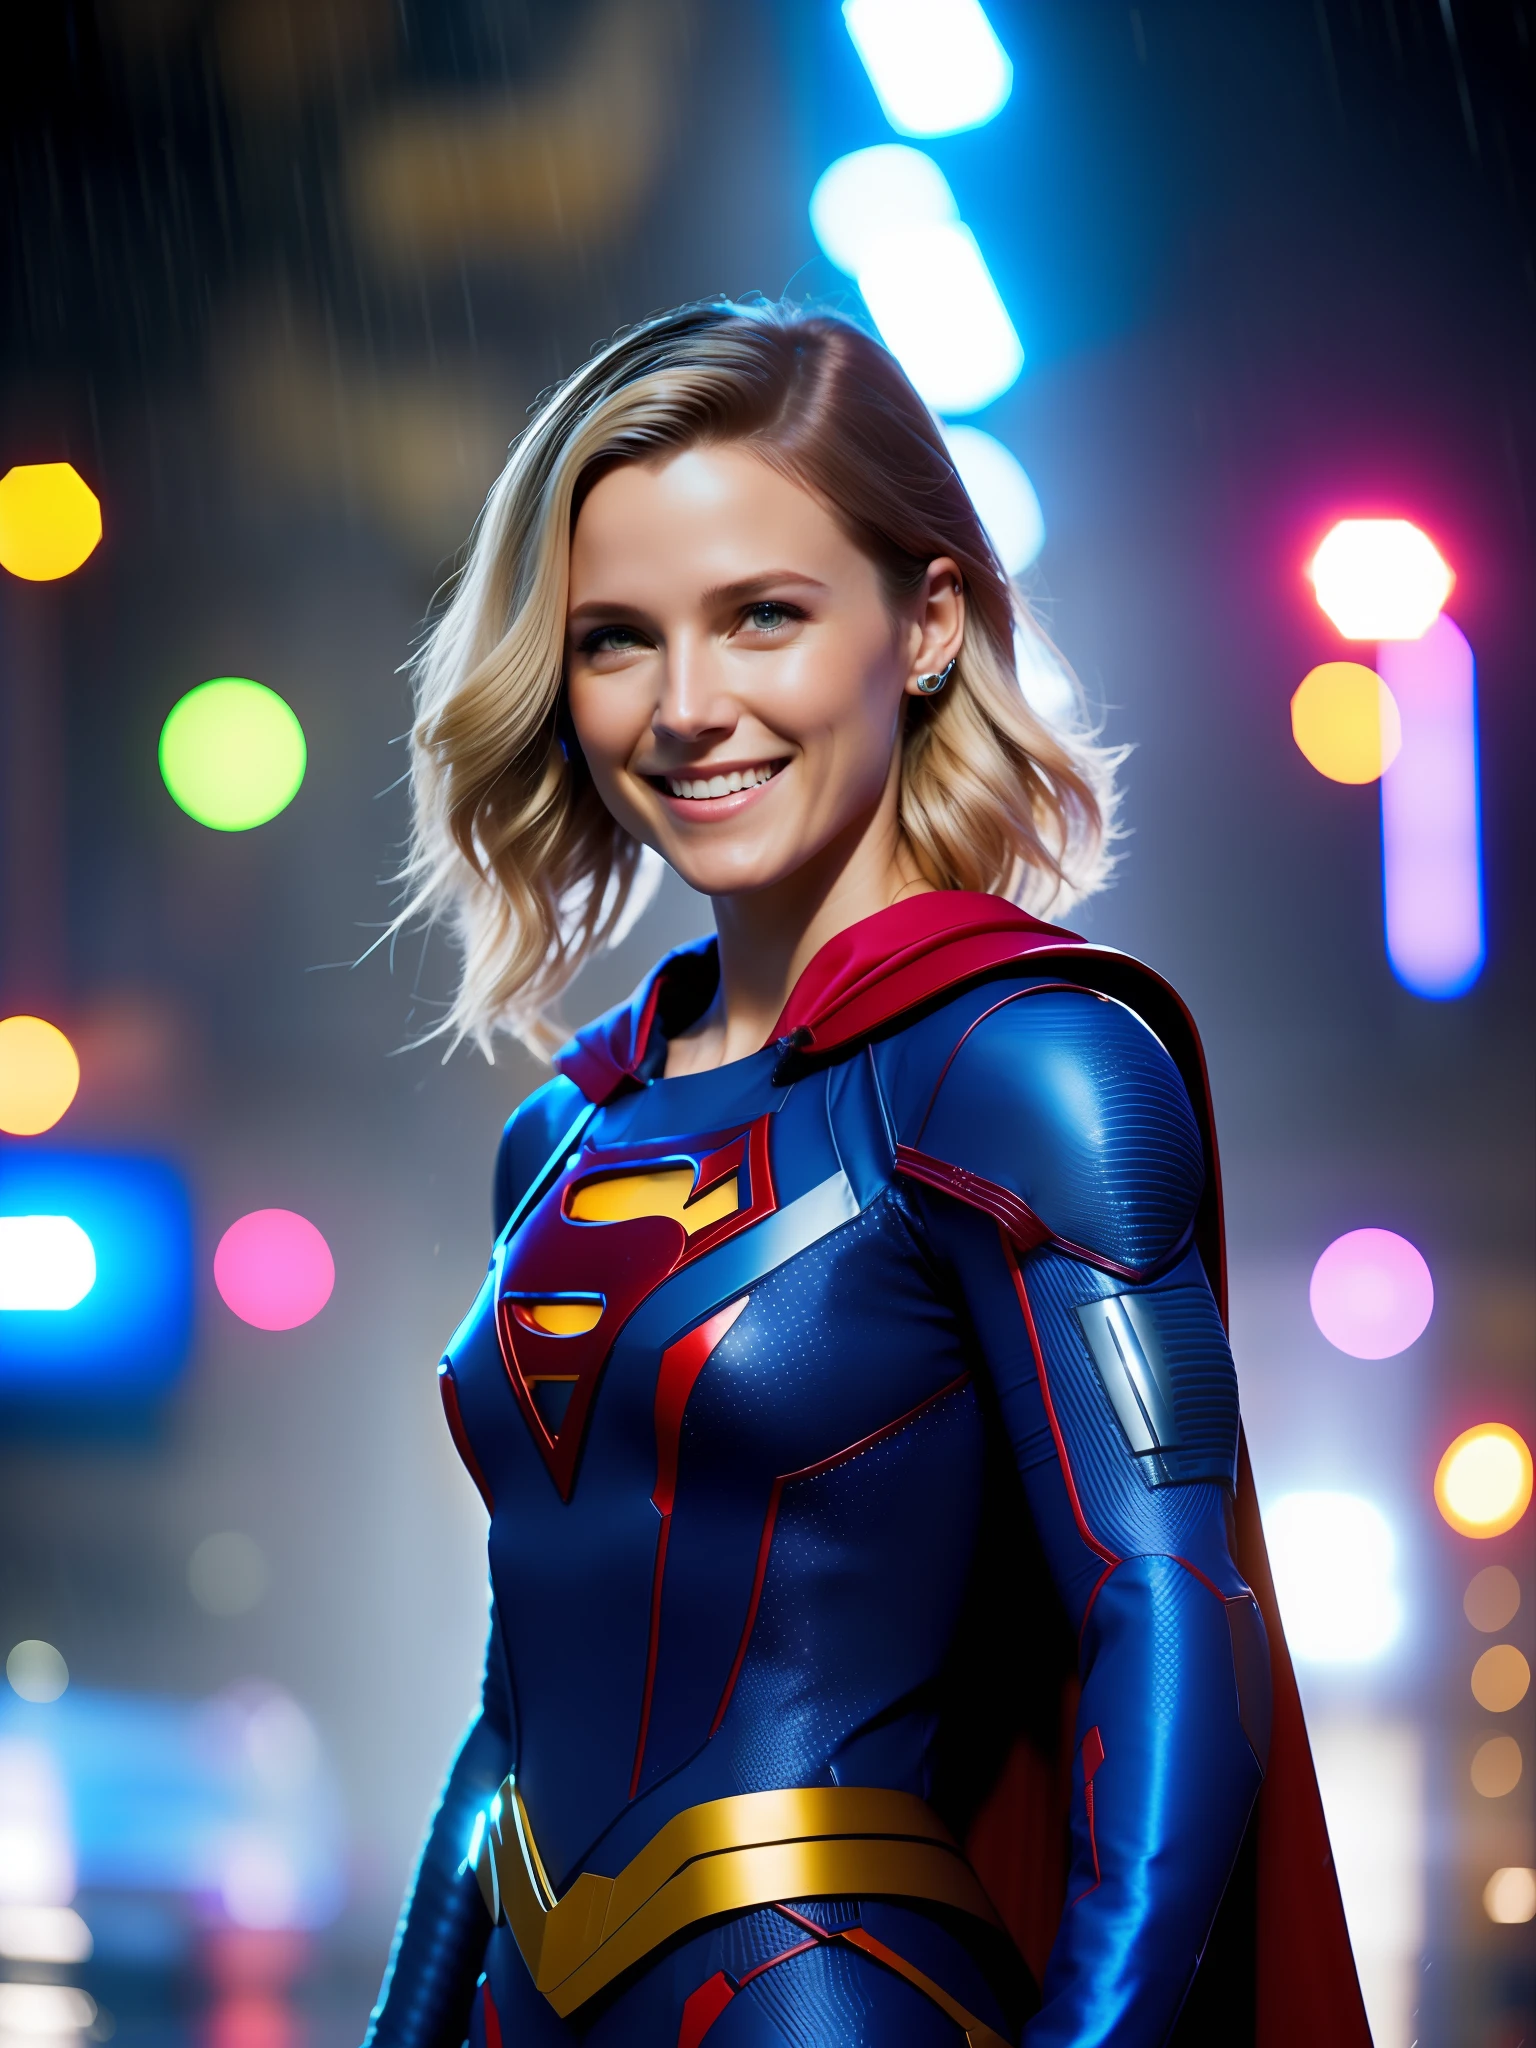 Female Supergirl award-winning photo of a woman, Blue and red superhero suit, square jawline, asymmetric face, short hair, in rain, smiling, purple light, 80mm, bokeh, mass effect, close up, fking_cinema_v2, 8k, cinematic